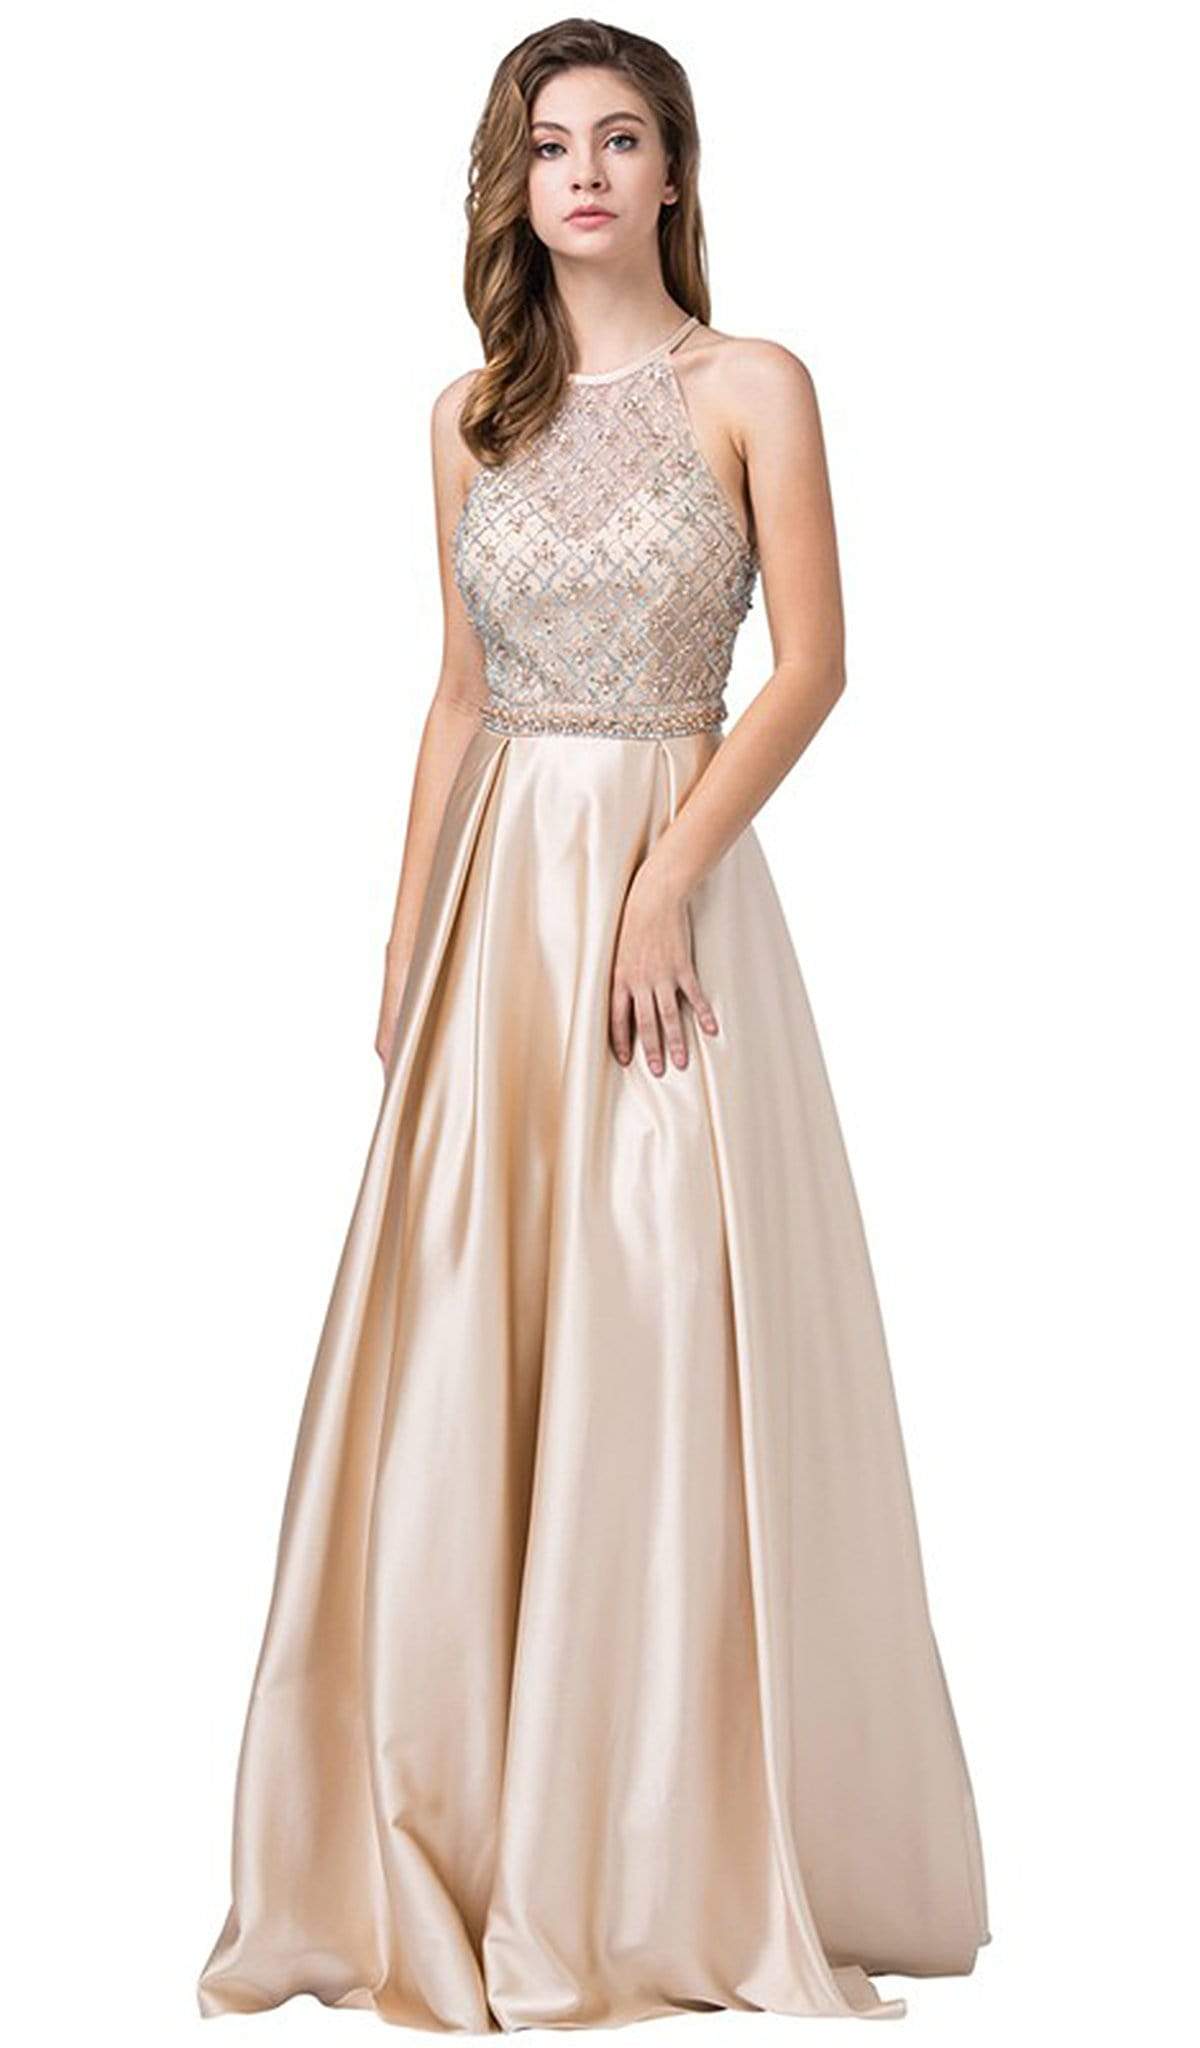 Dancing Queen - 2744 Embellished Halter Pleated A-line Gown